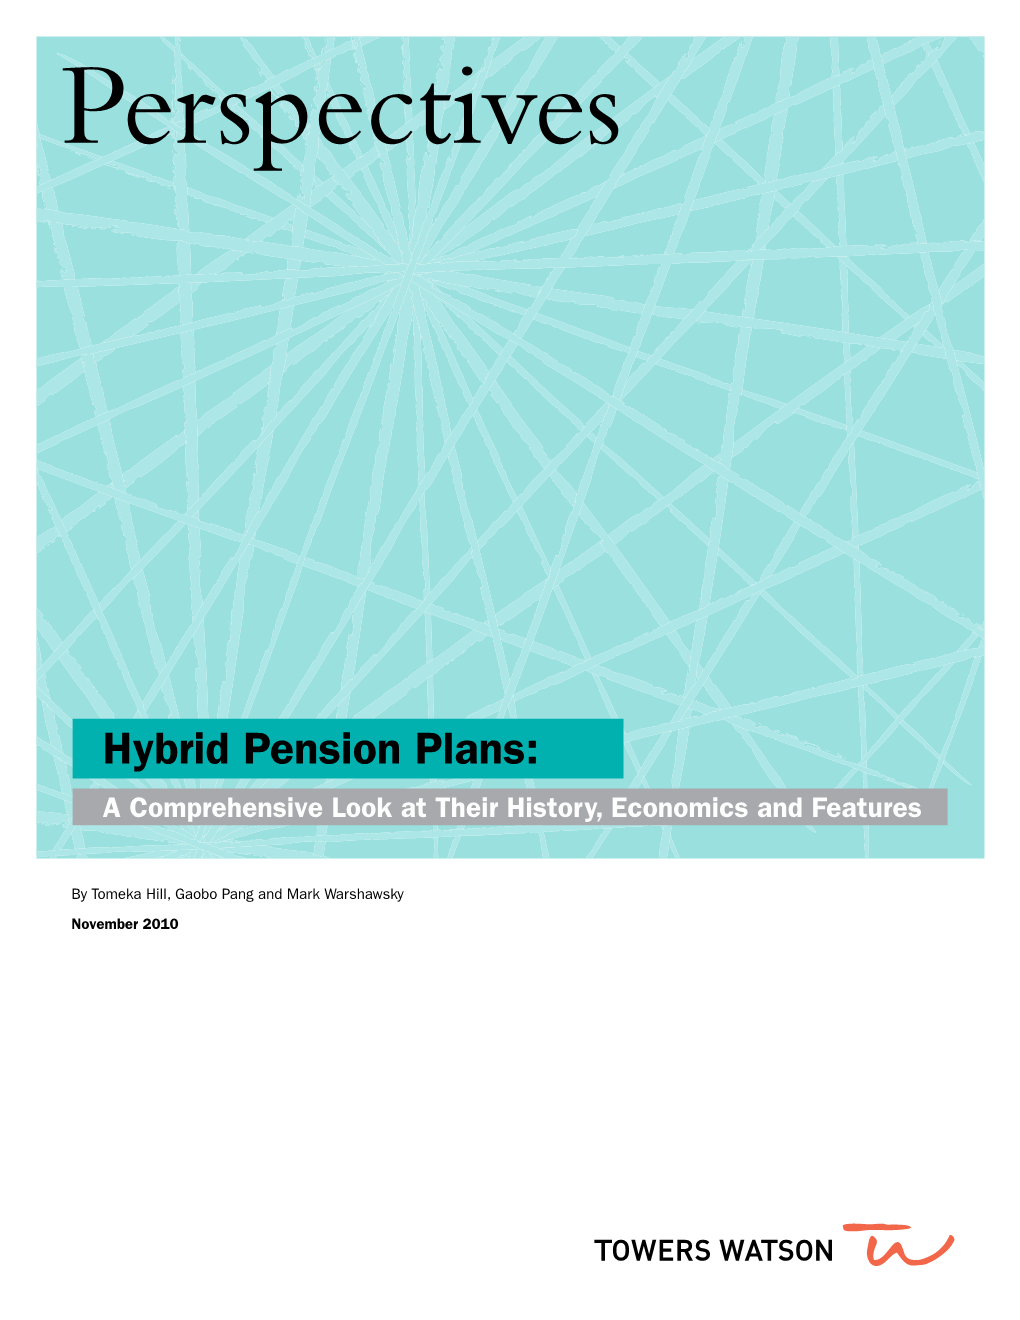 Hybrid Pension Plans: a Comprehensive Look at Their History, Economics and Features